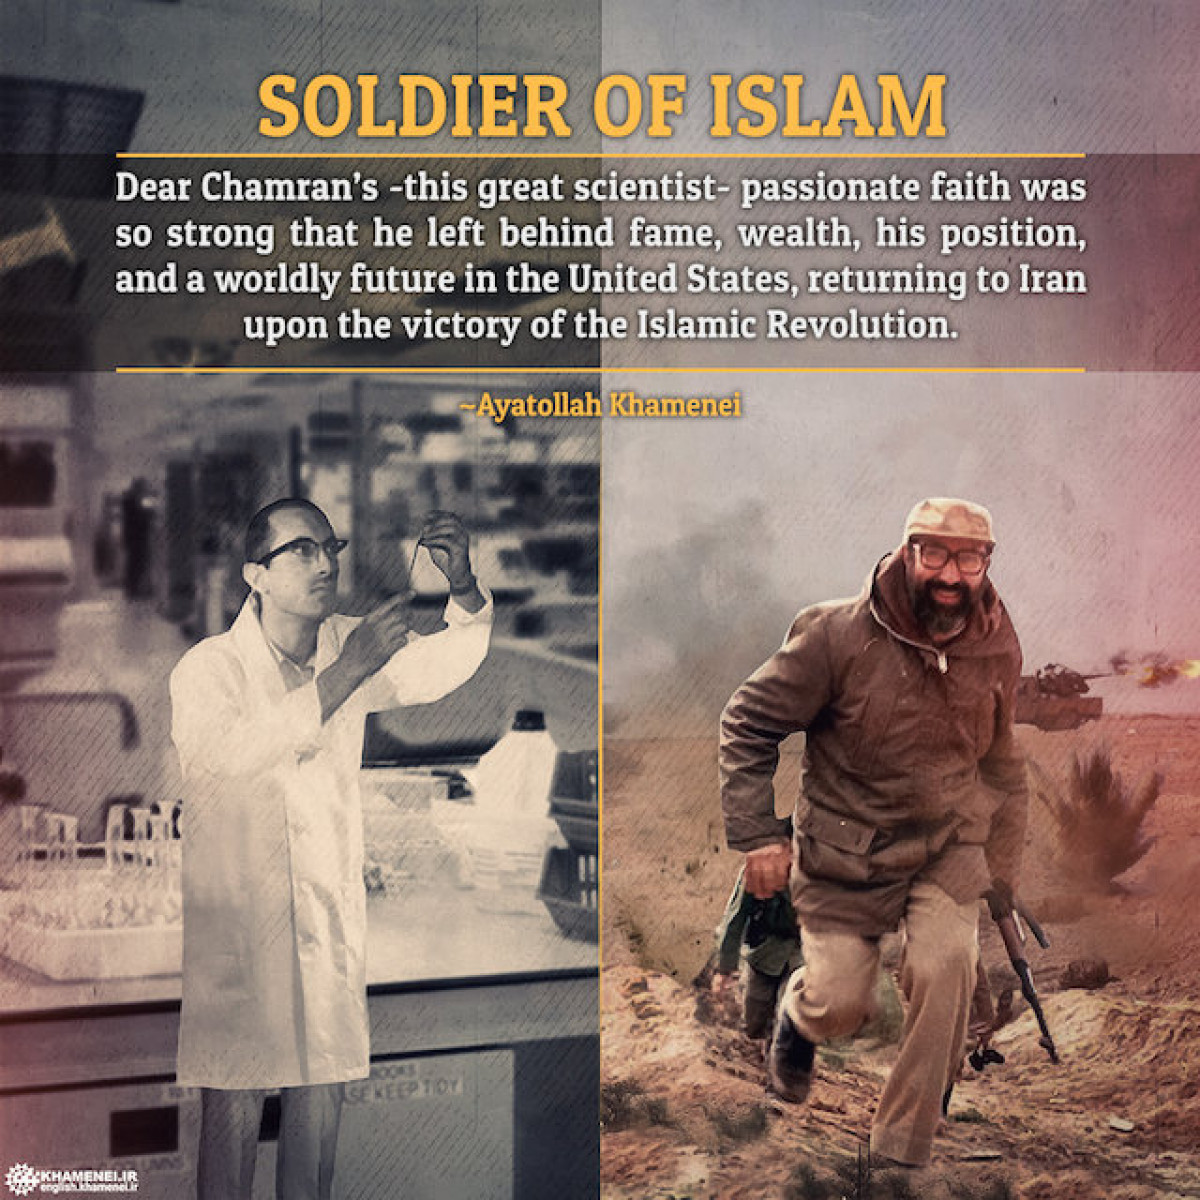 Martyr Chamran: A scientist in U.S. who became a soldier for Islam